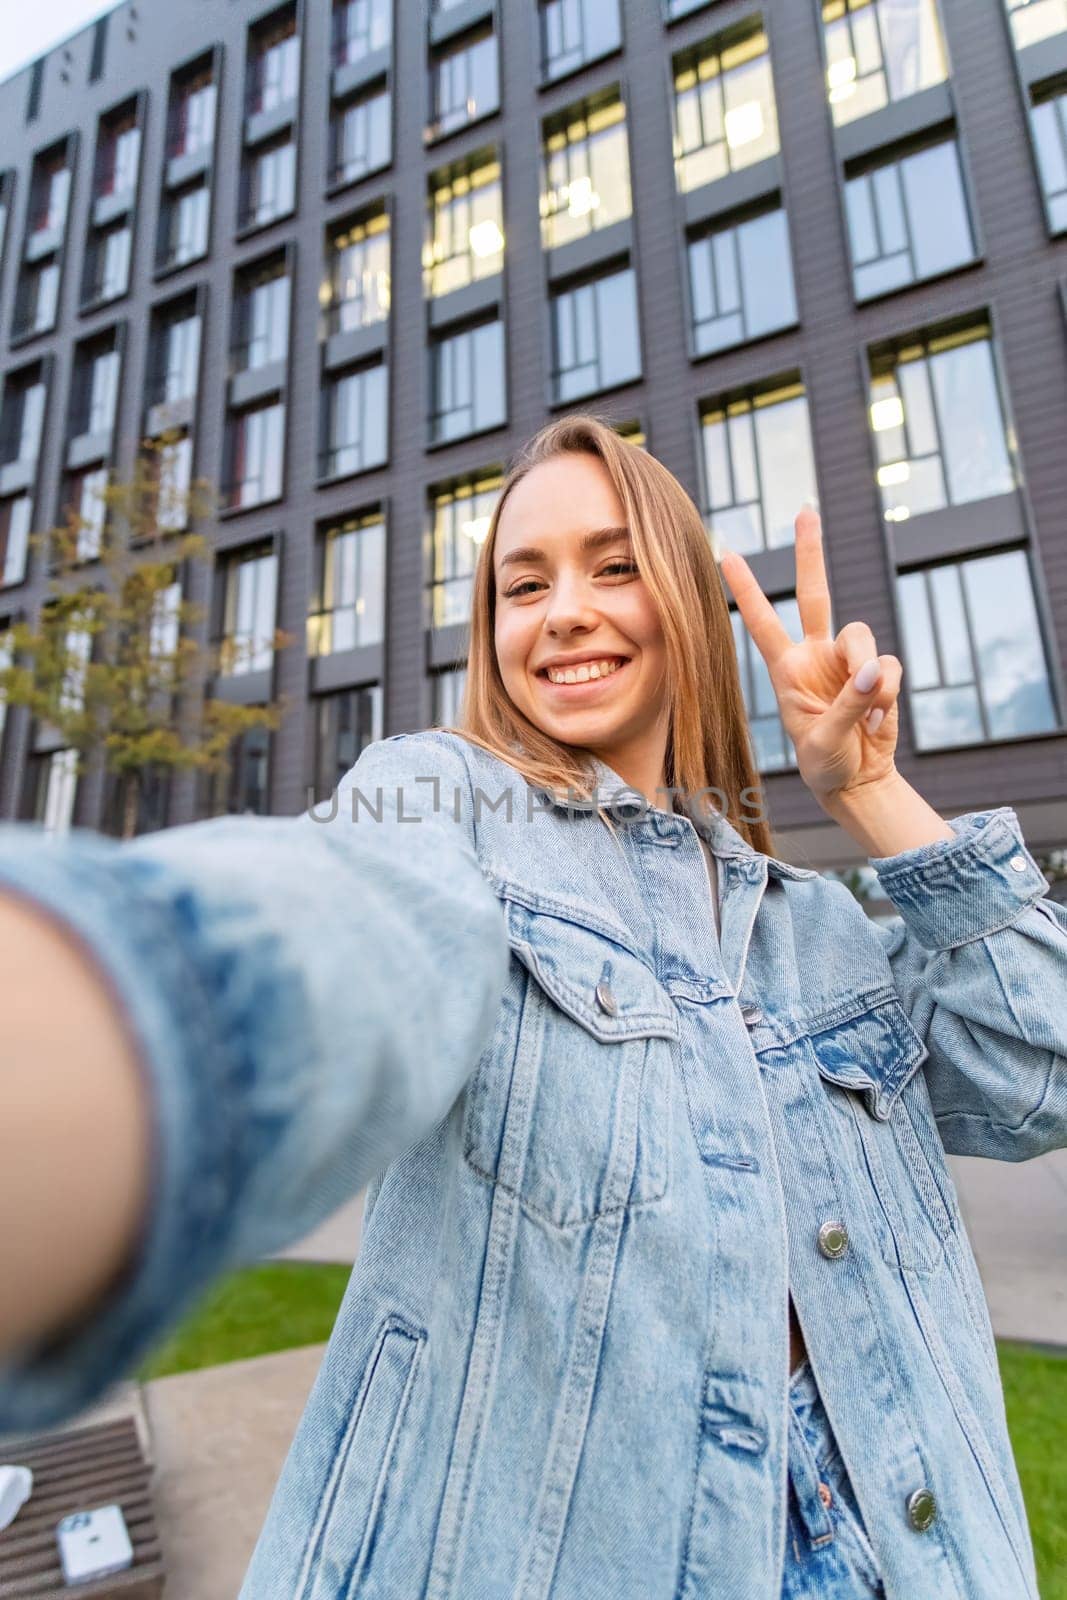 Woman in a great mood takes a selfie and shows a piece in the street.